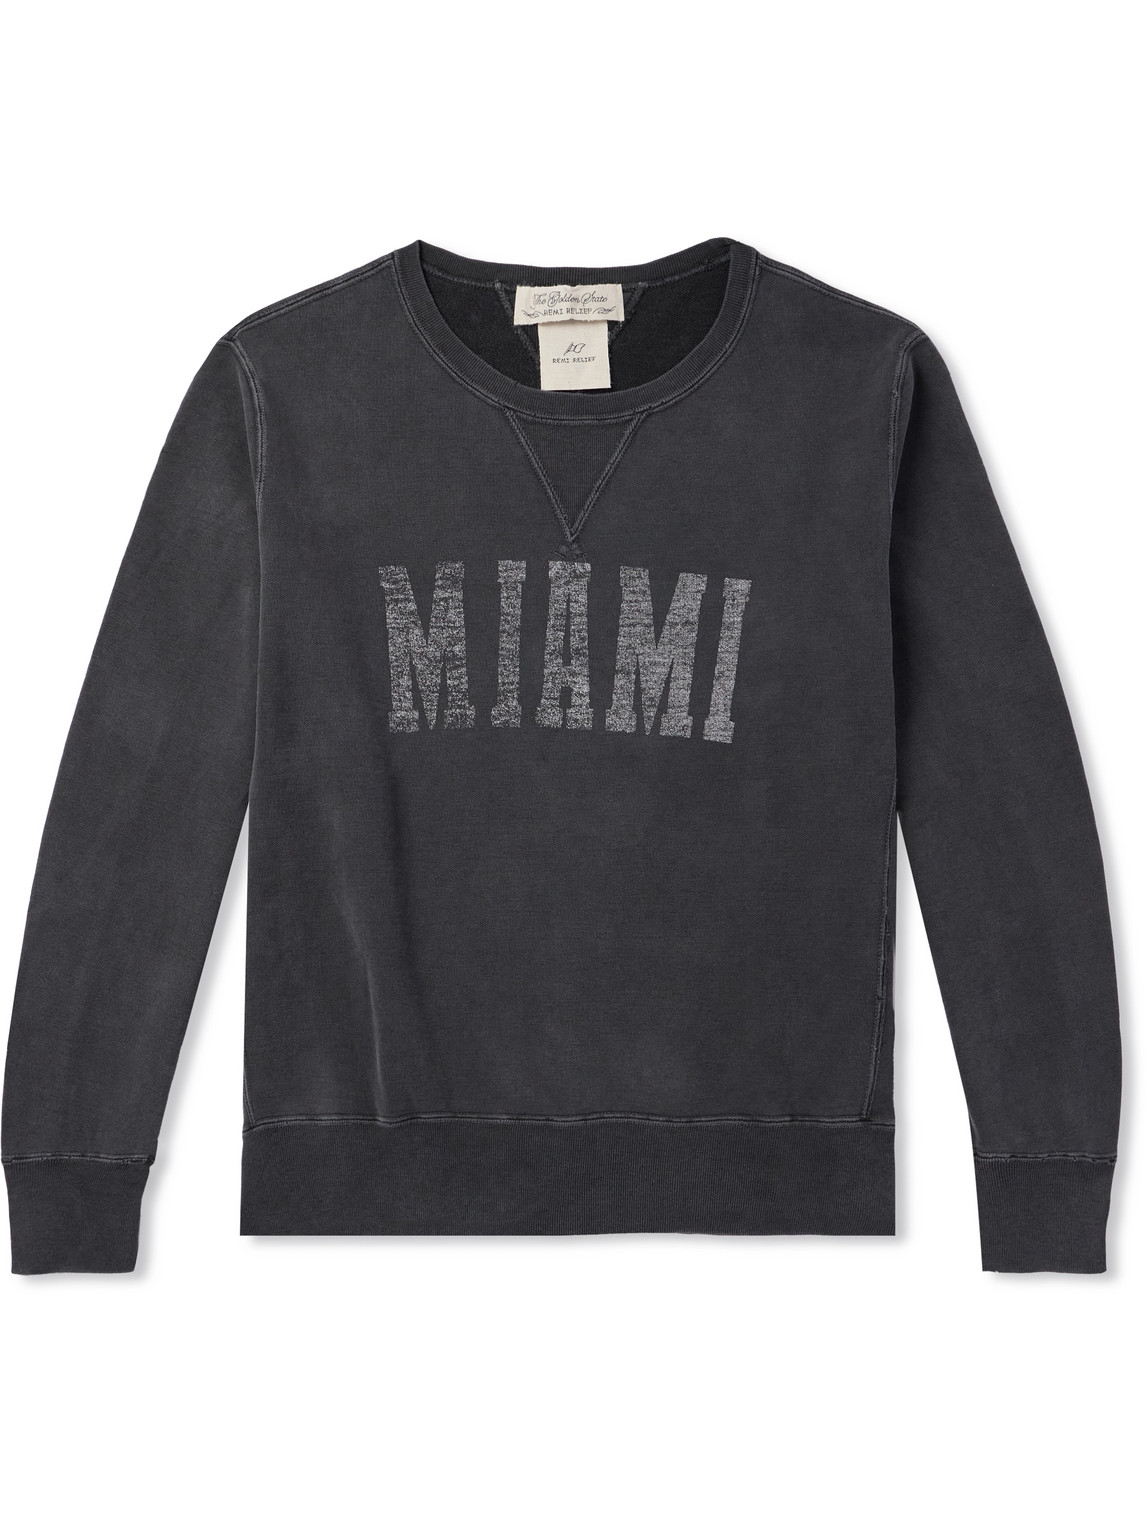 Remi Relief Printed Cotton-jersey Sweatshirt In Gray